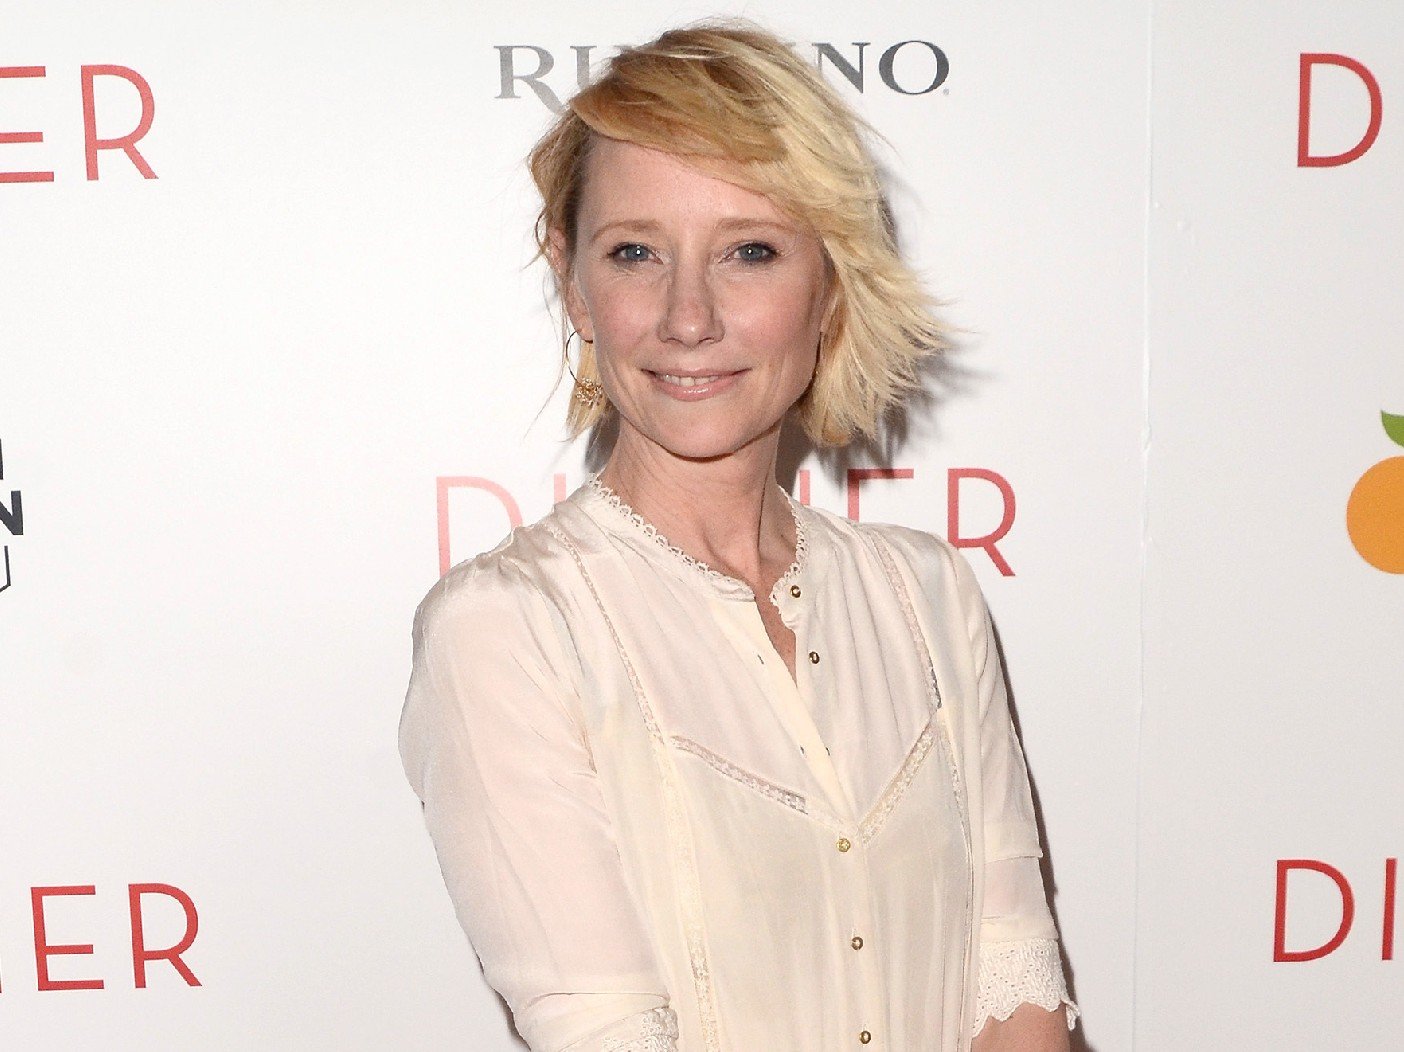 Anne Heche, just hours before her Crash, took this photograph